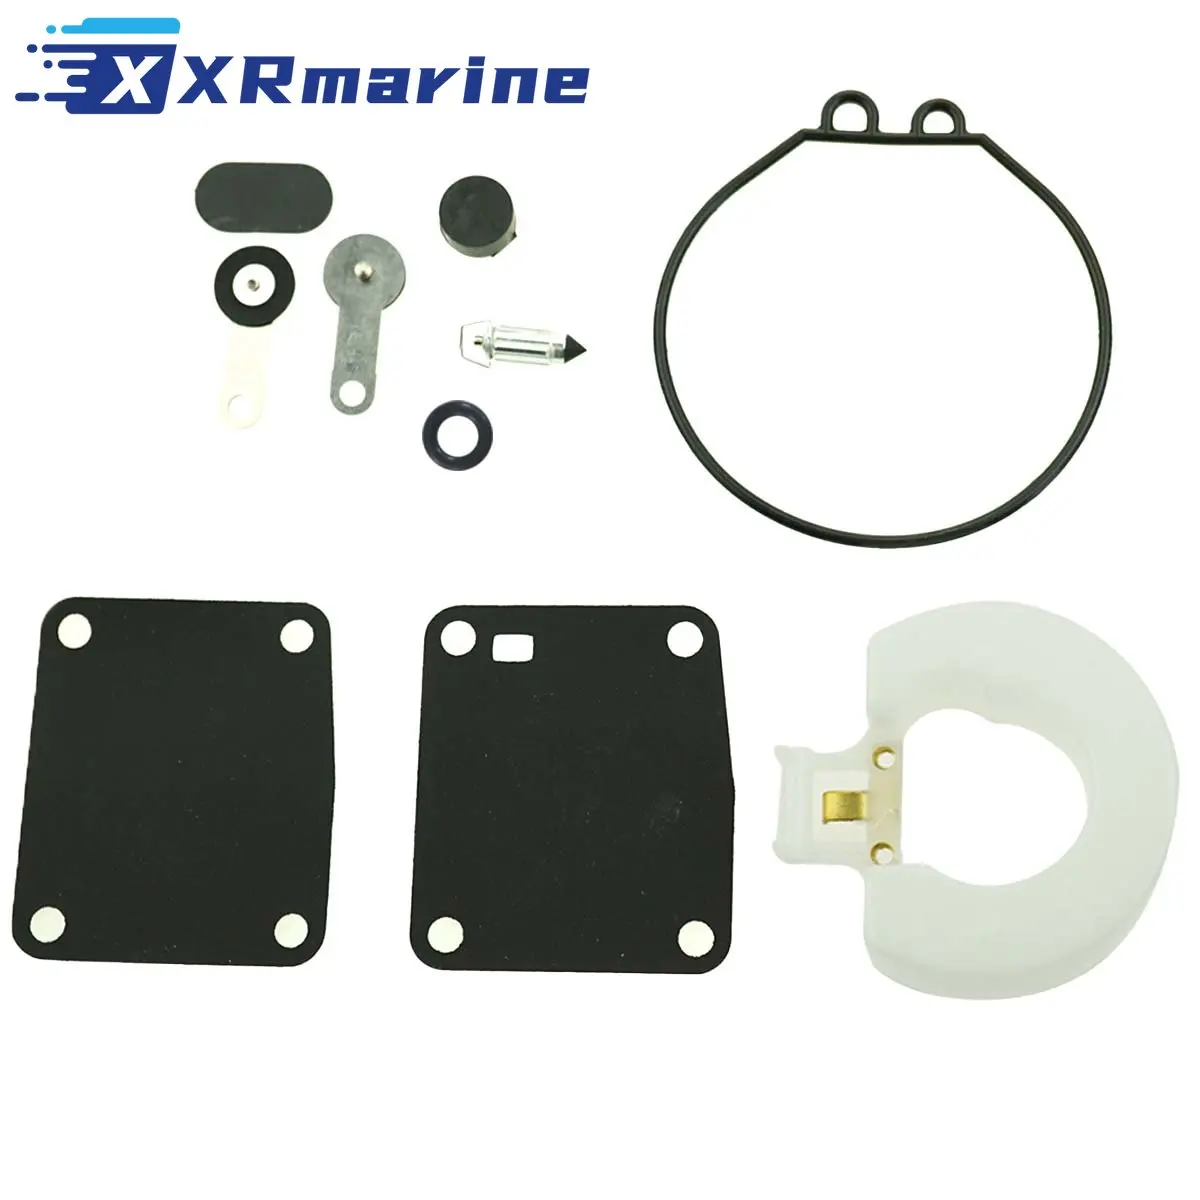 6G1-W0093-00 Carburetor Repair Kit For Yamaha 3HP 6HP 8HP Outboard Engine 1984-1996 6G1-W0093-00-00 6L5-W0093-00-00 1984 скотный двор эссе